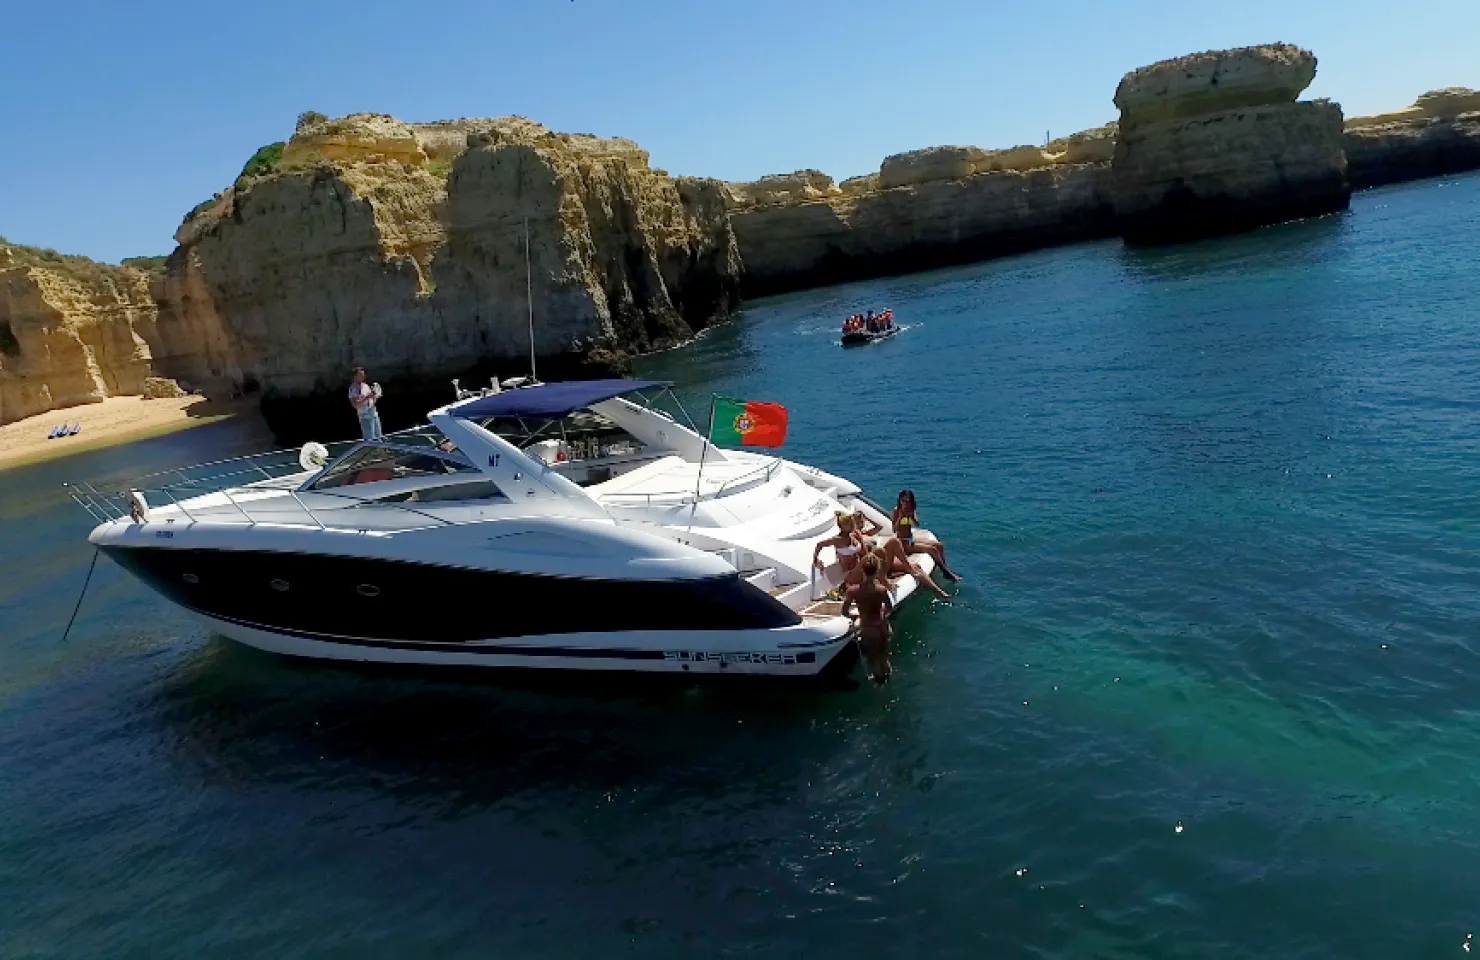 Afternoon Luxury Cruise - Vilamoura things to do